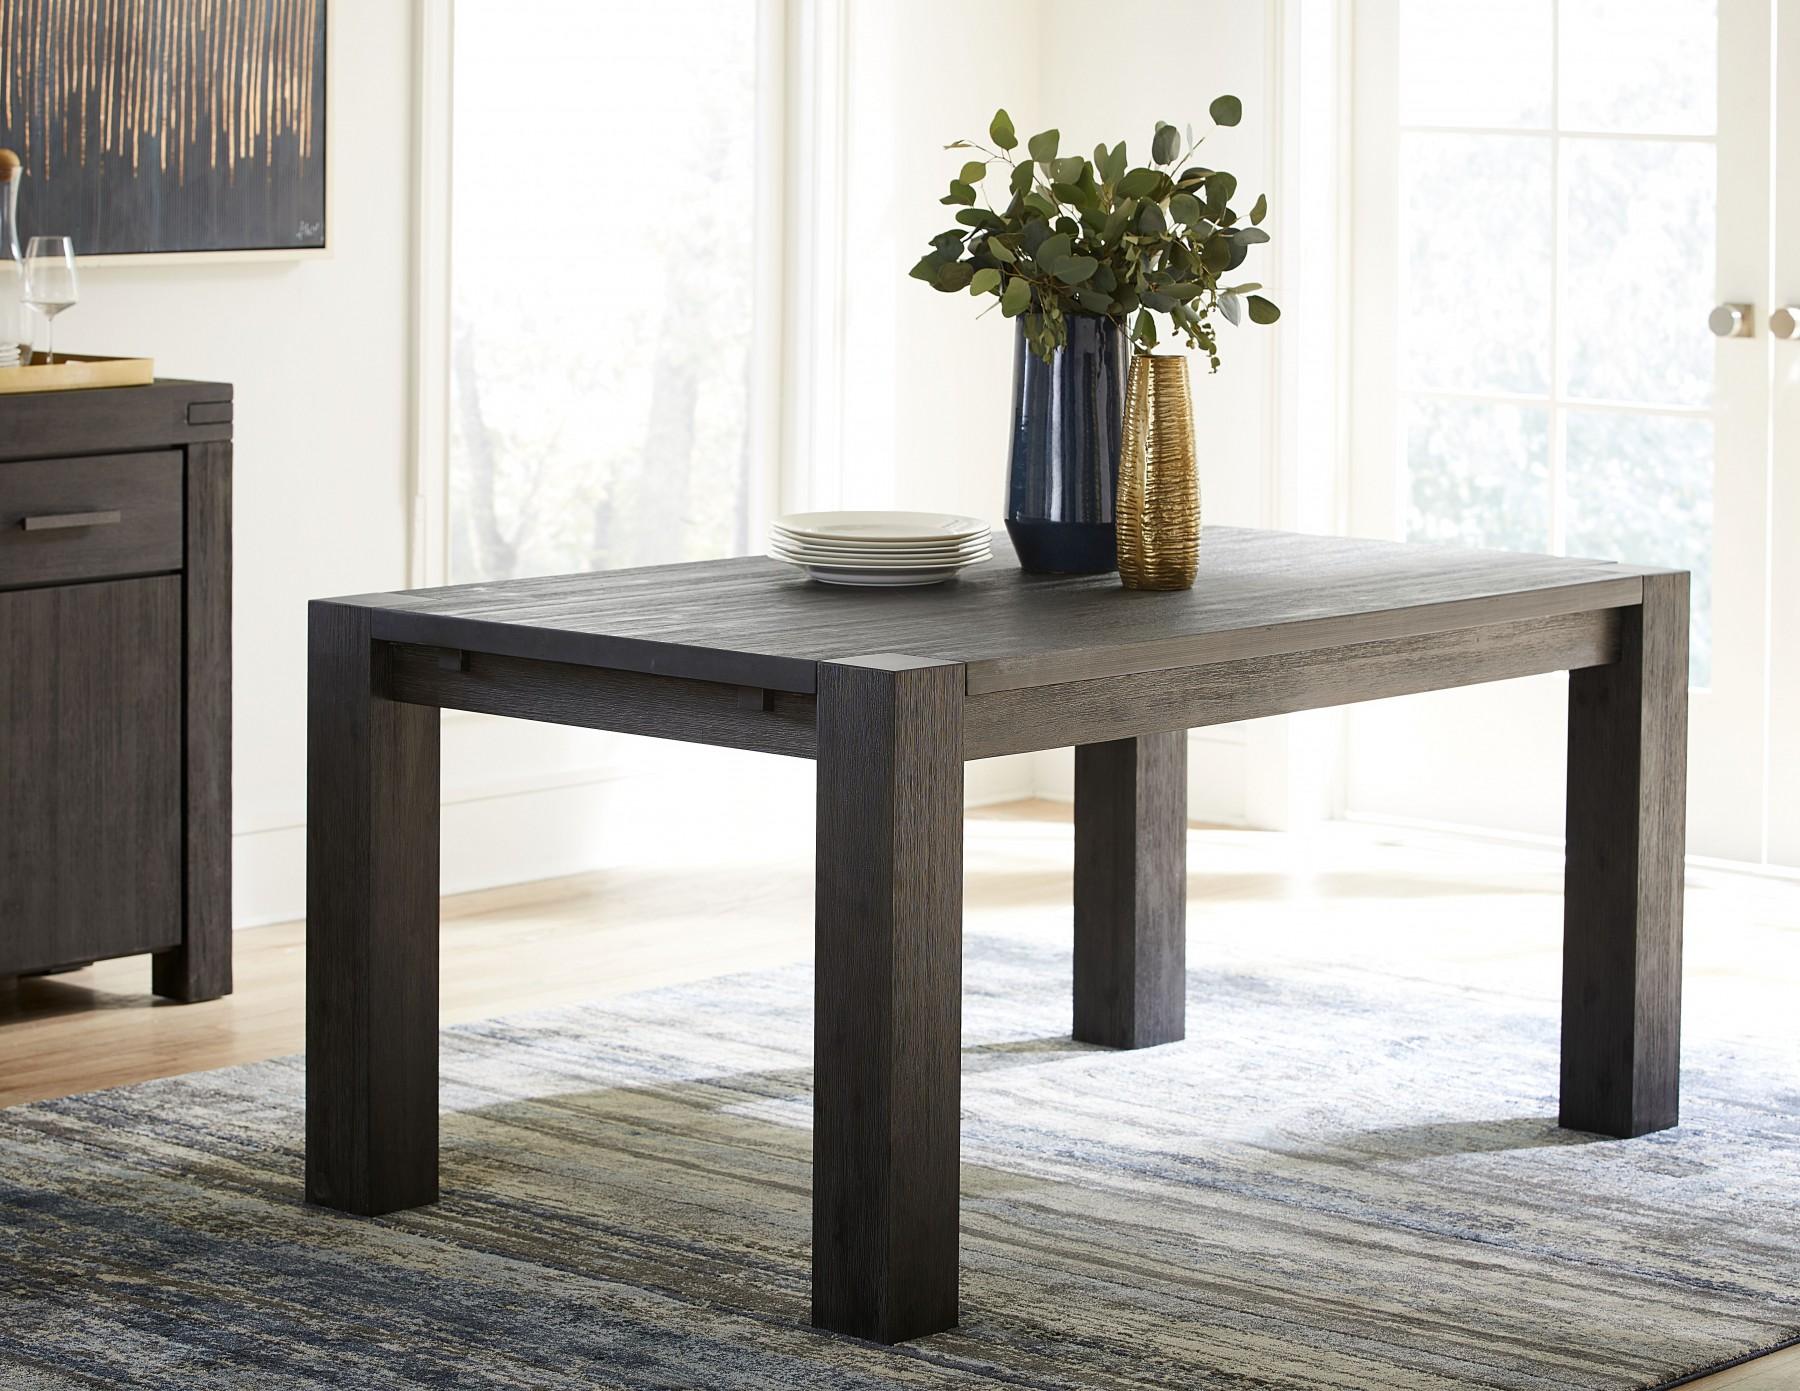 

    
Graphite Finish Acacia Solids Dining Table MEADOW by Modus Furniture
